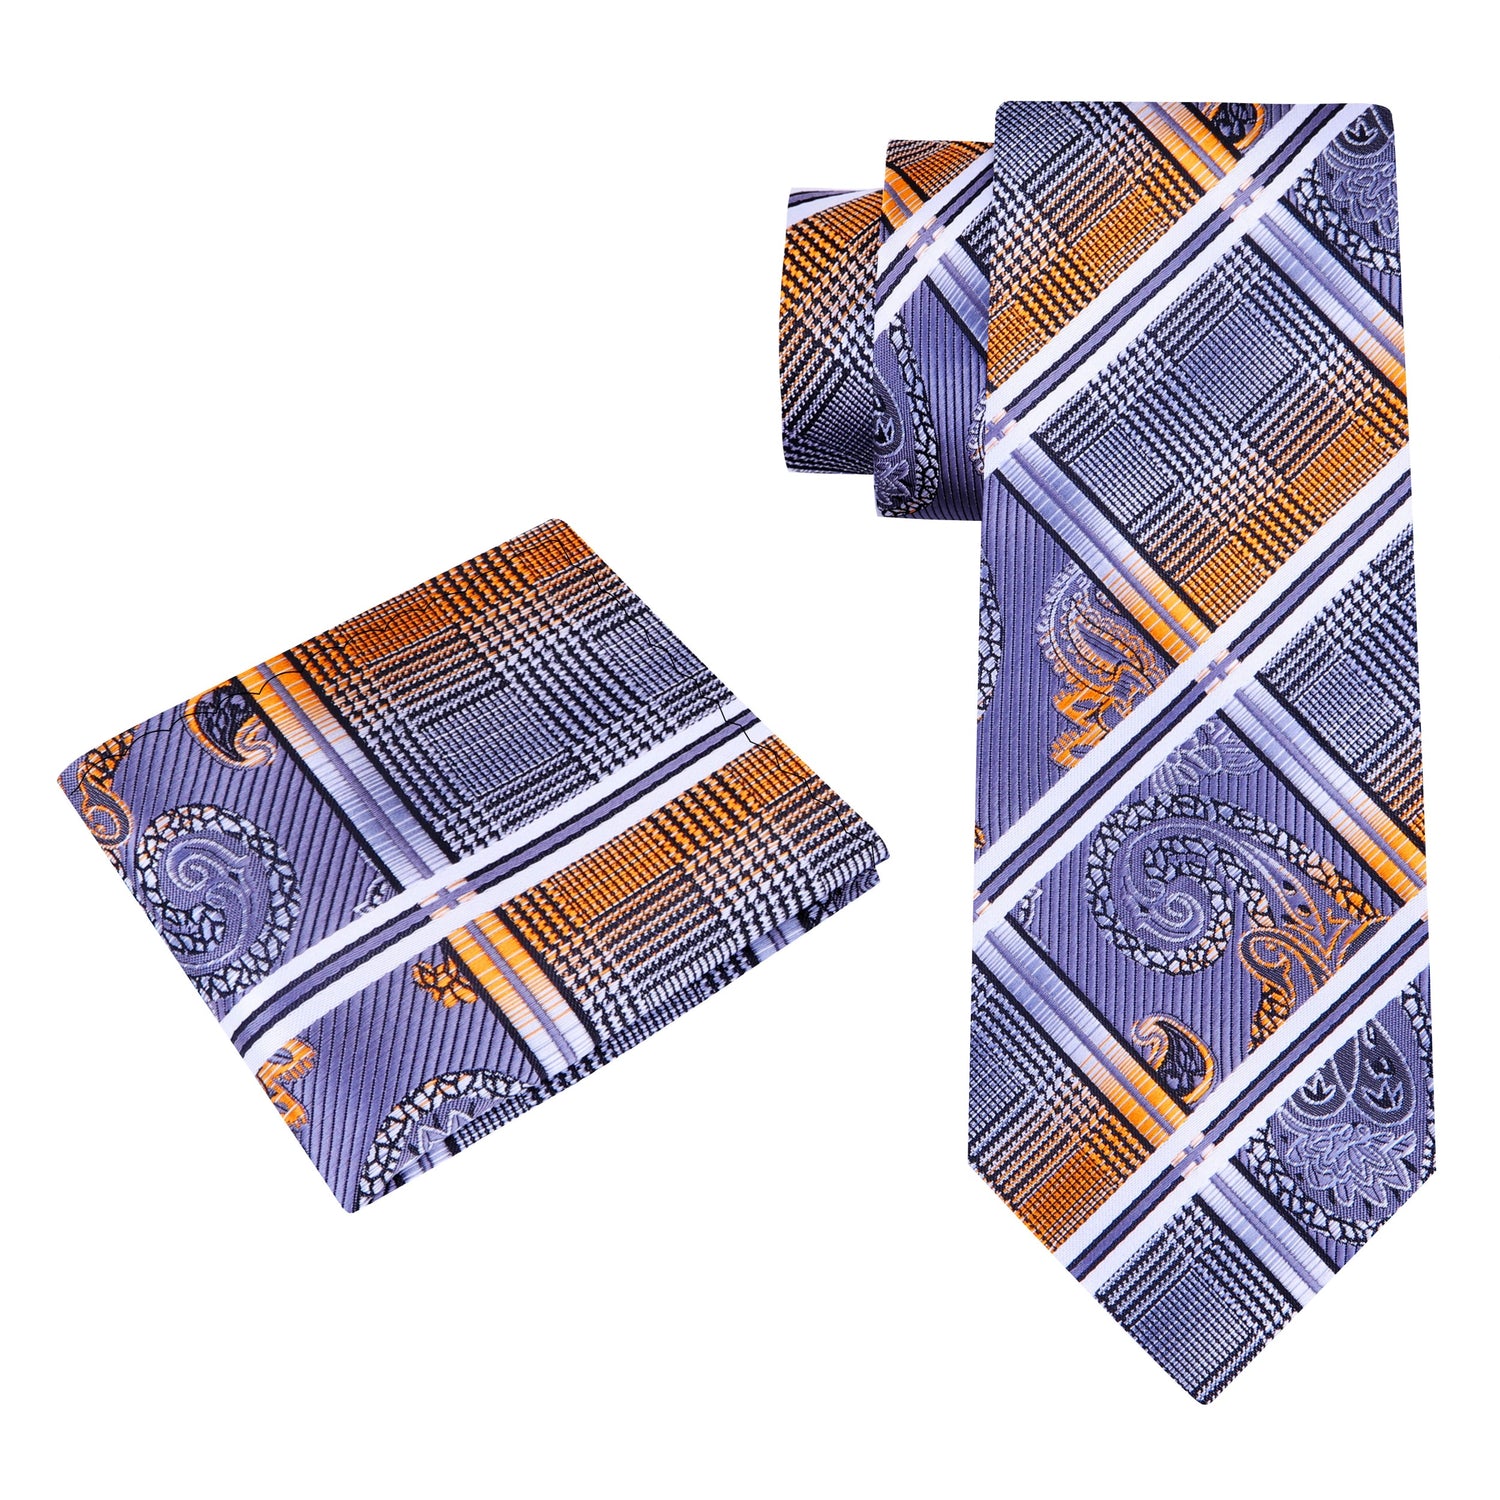 Alt View: Grey, Black, Orange Plaid And Paisley Tie and Matching Square